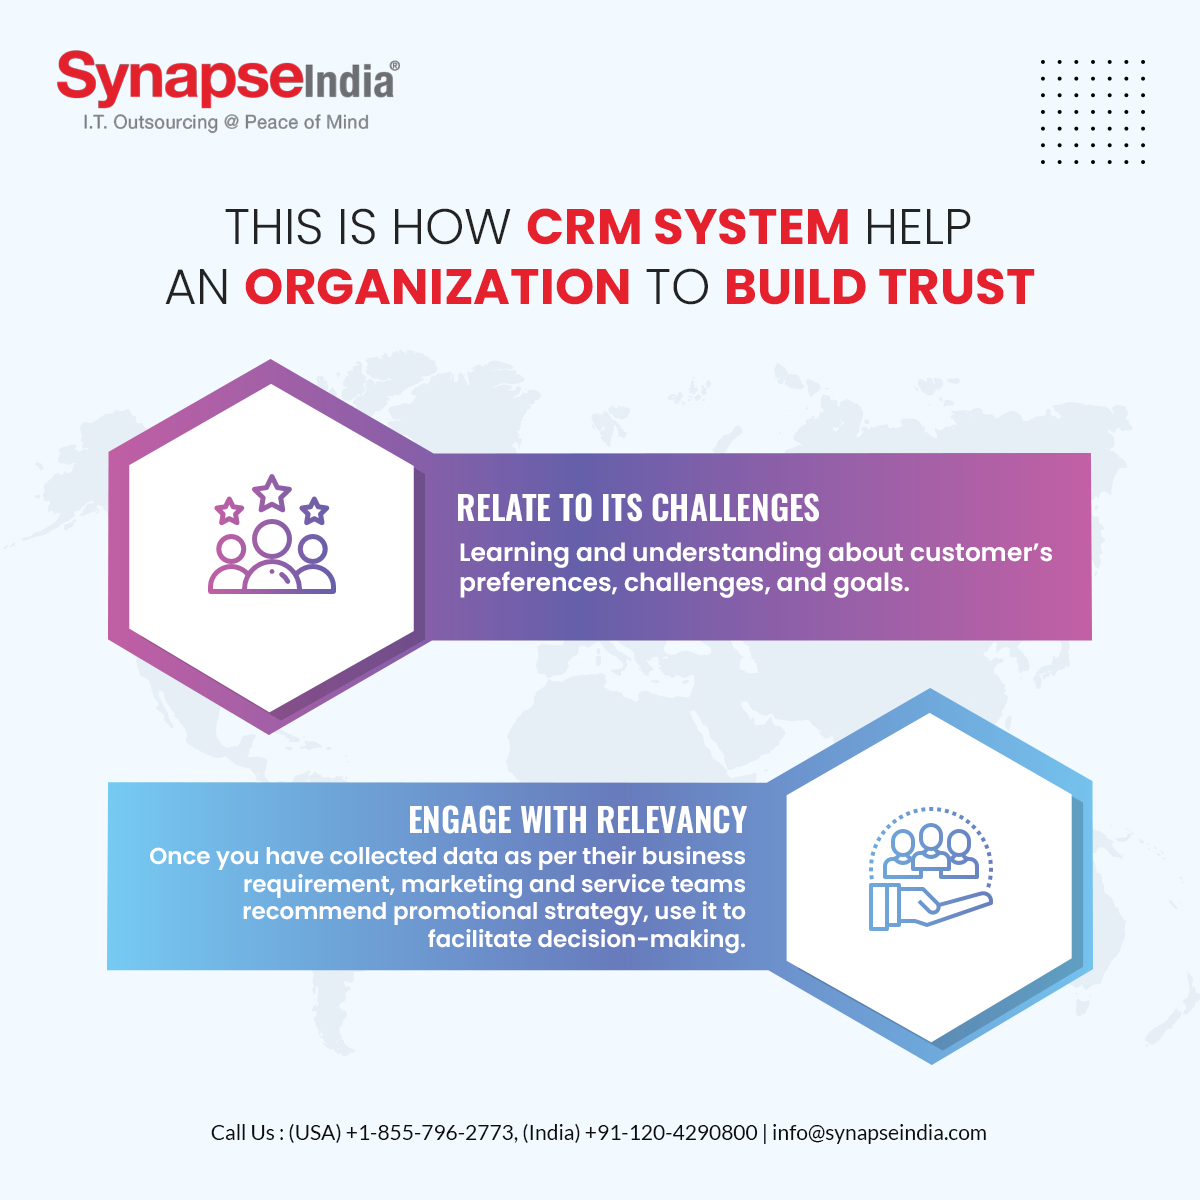 How CRM System help an organization to build trust-Infographic